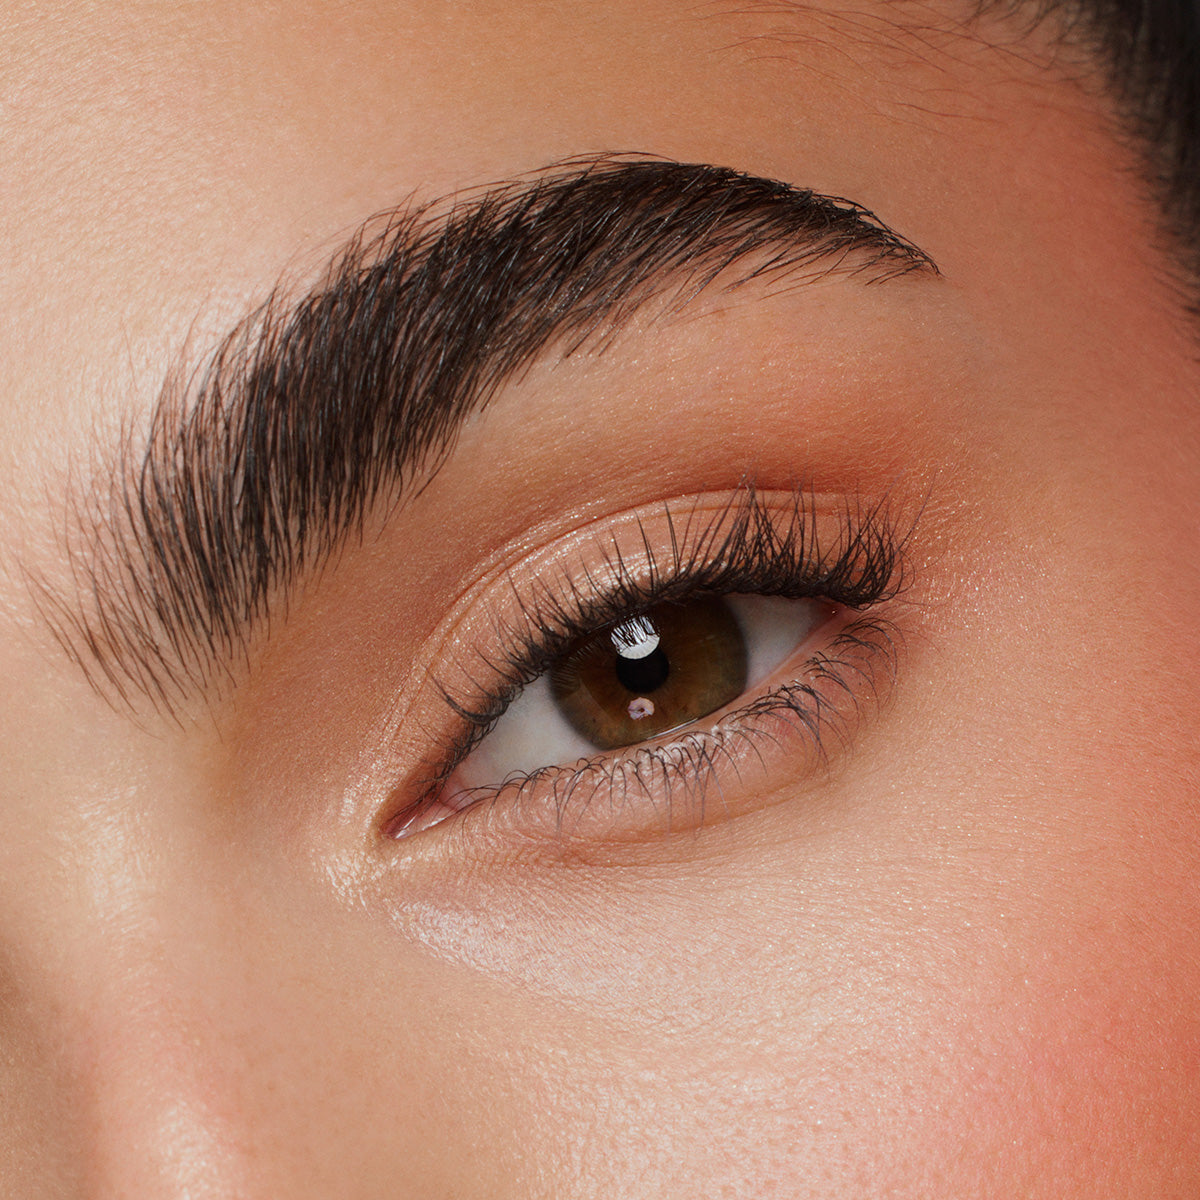 CLEAR - clear brow gel on brows